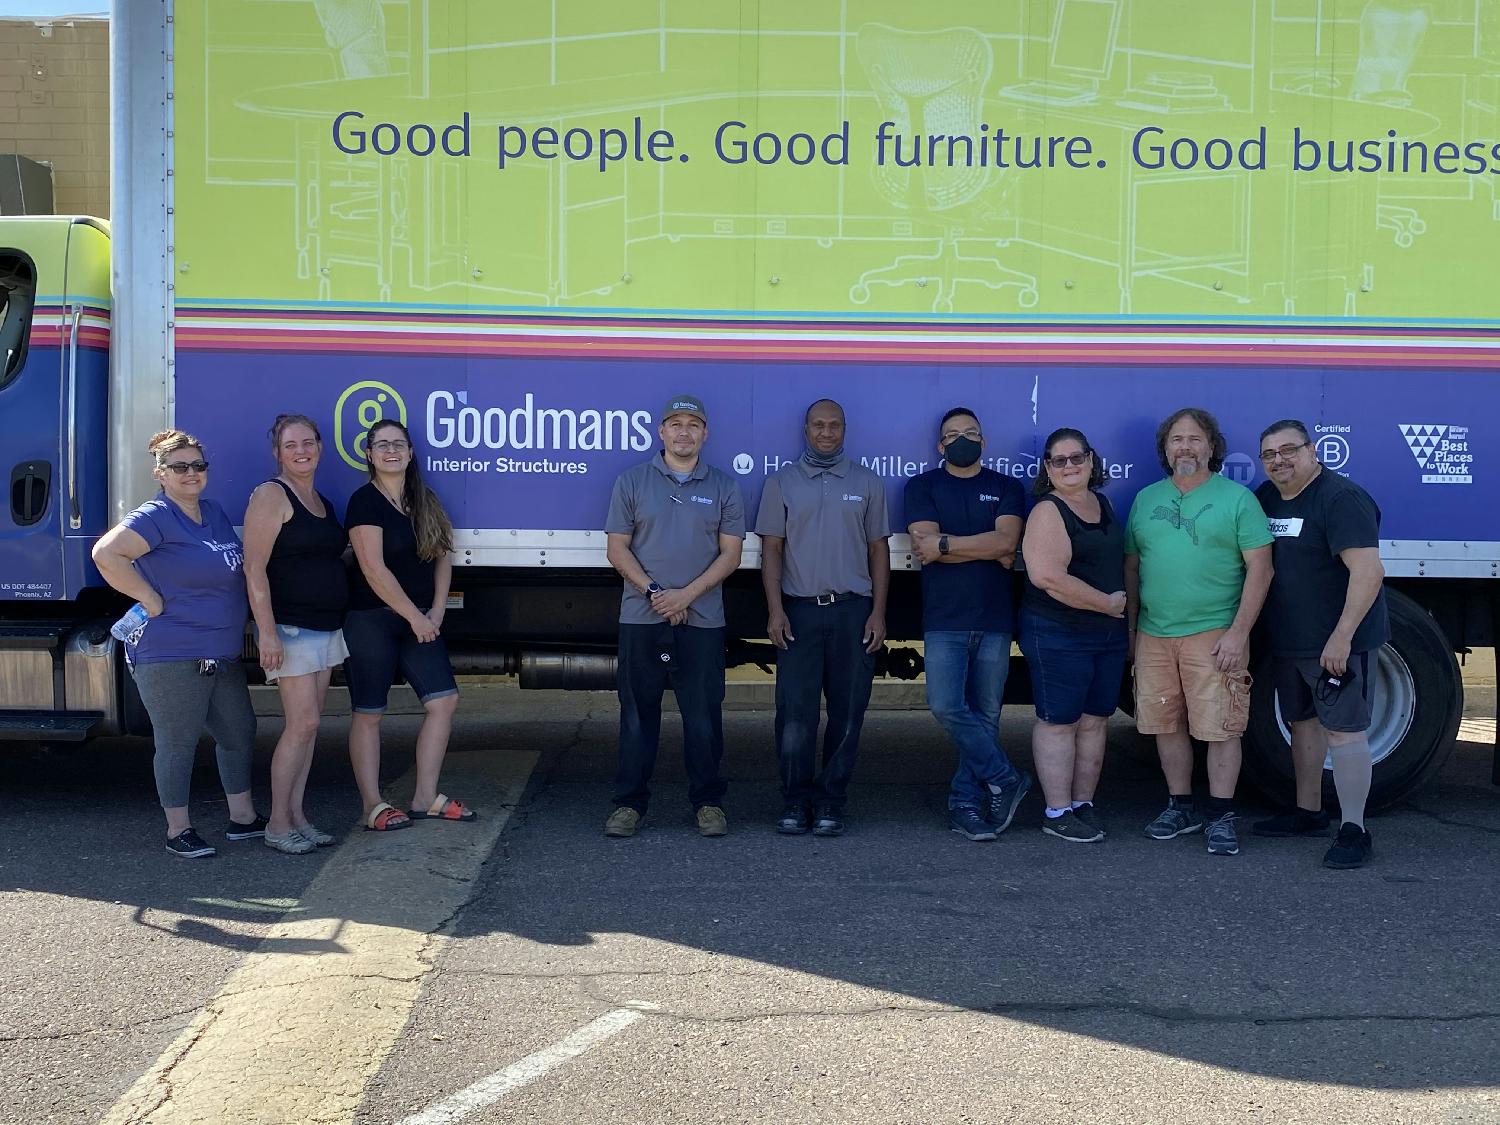 Our RootedinGood team partnered with the Phoenix Association for the Deaf to repurpose furniture for their space.